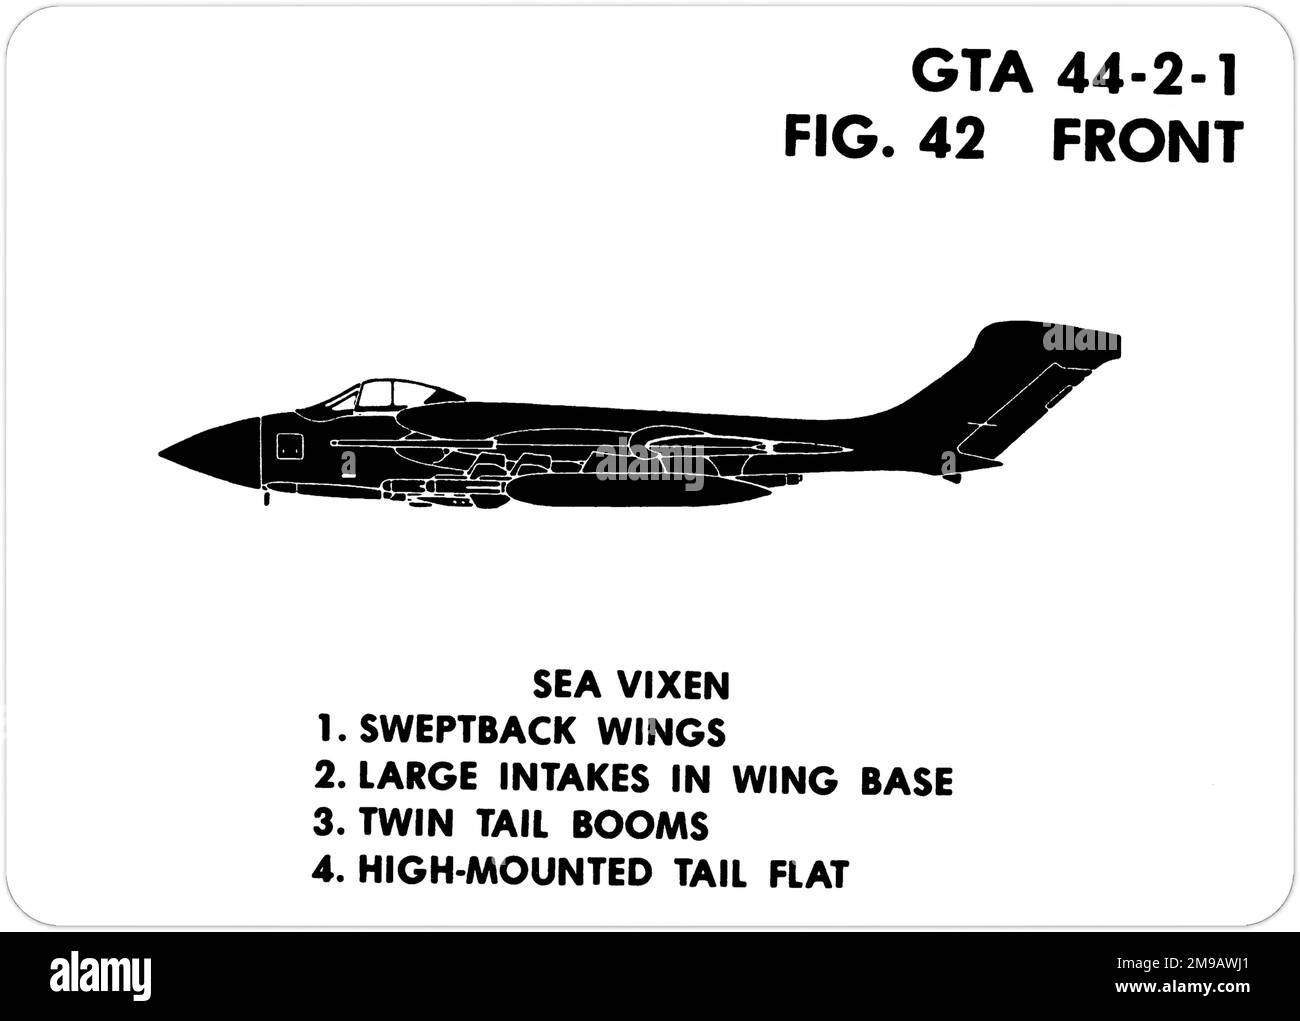 de Havilland Sea Vixen F(AW).2. This is one of the series of Graphics Training Aids (GTA) used by the United States Army to train their personnel to recognize friendly and hostile aircraft. This particular set, GTA 44-2-1, was issued in July1977. The set features aircraft from: Canada, Italy, United Kingdom, United States, and the USSR. Stock Photo